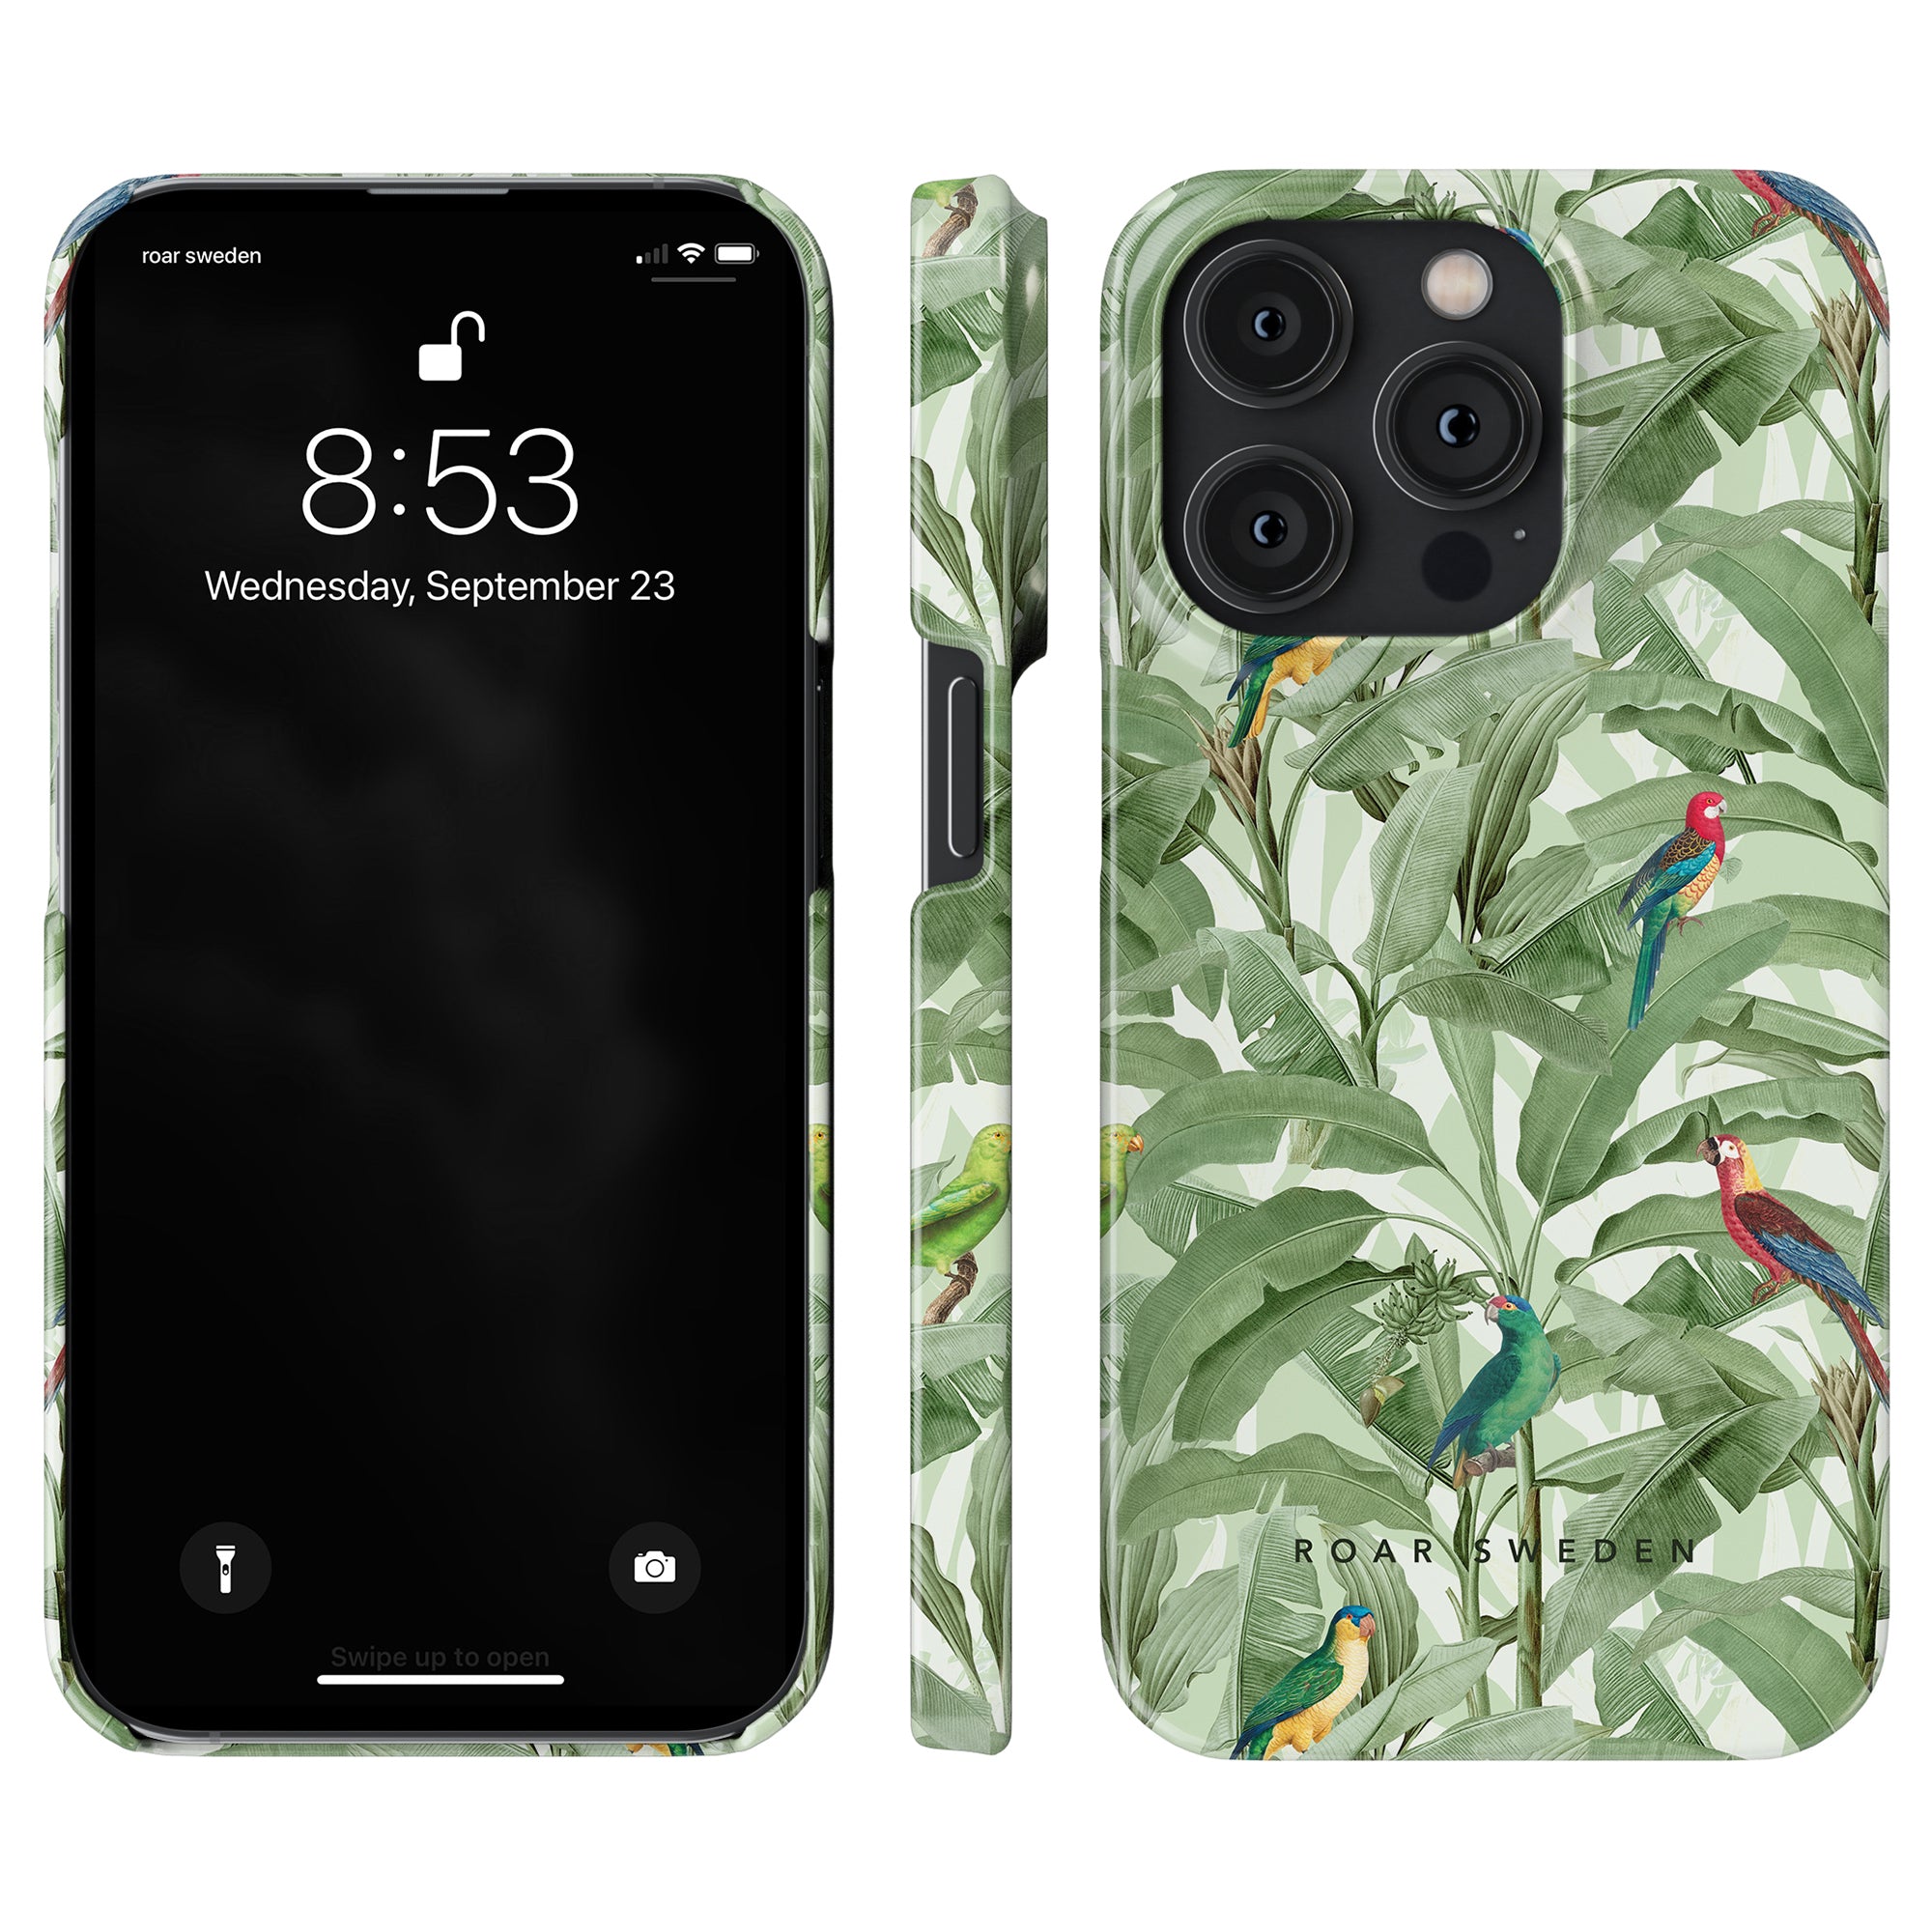 Parrot Paradise - Slim case with a botanical and bird-themed design, perfect for those seeking a unique accessory. This product combines elegance and nature-inspired elements, making it an ideal choice for consumers interested in SEO-optimized.